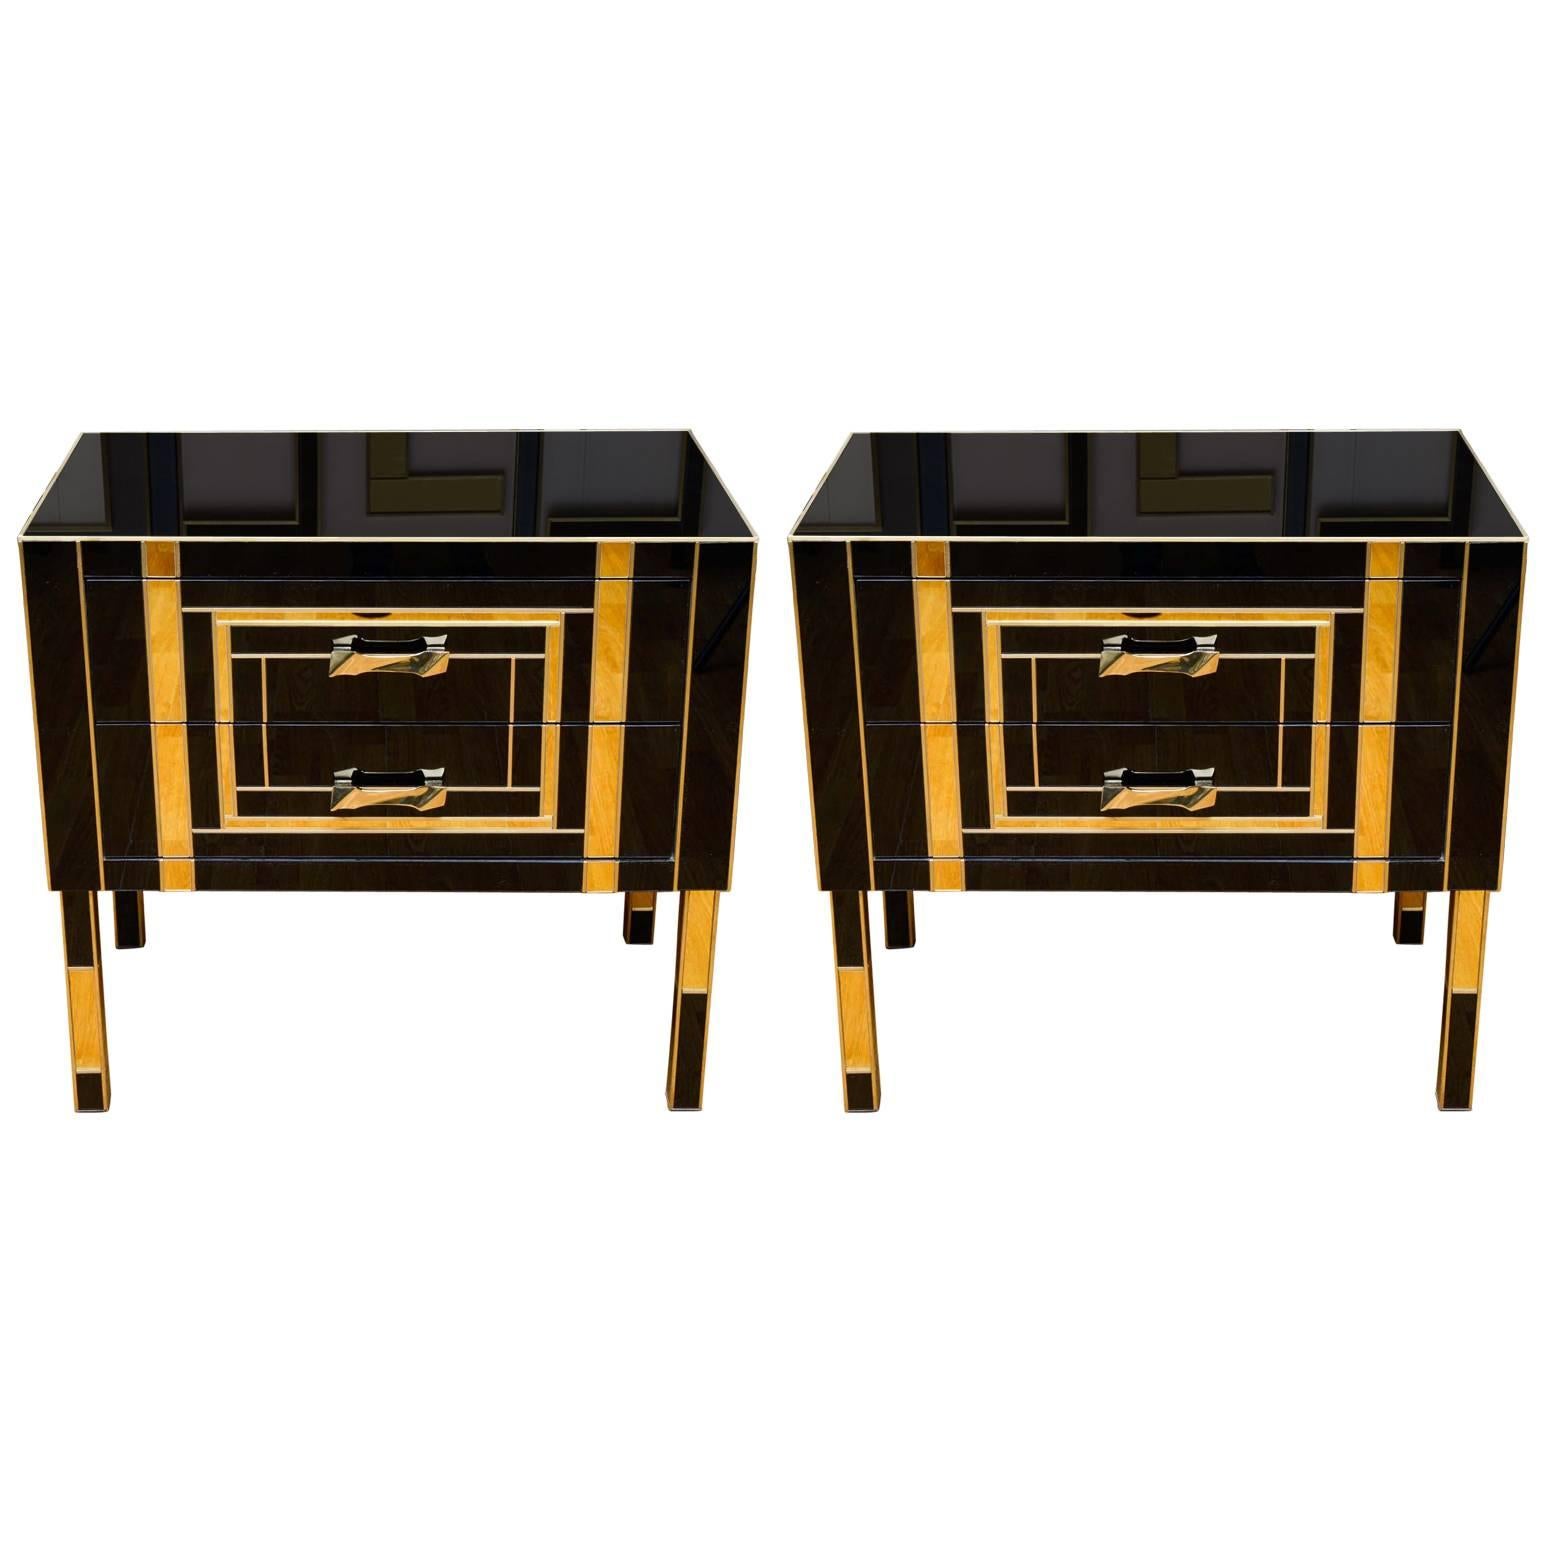 Pair of Nightstands in Tinted Glass, Exclusive Design Made for Justine